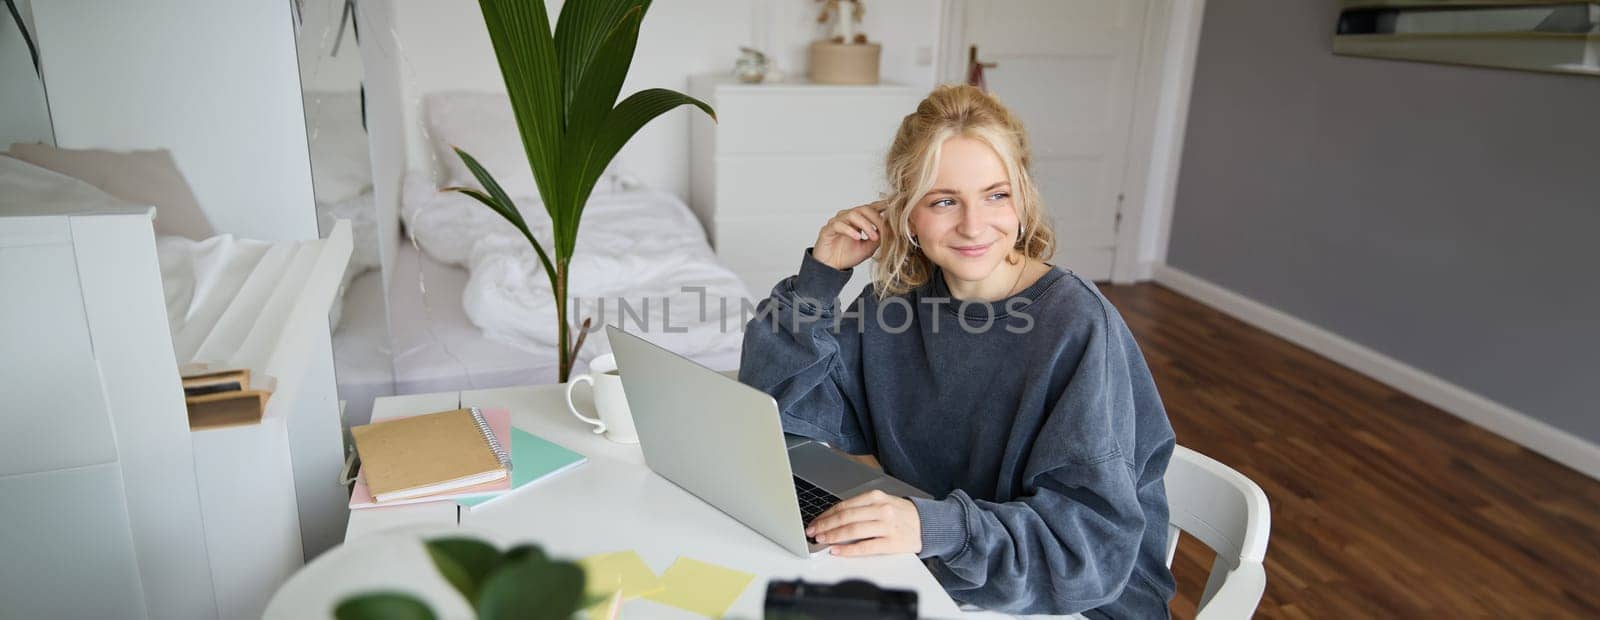 Portrait of woman sitting at desk with laptop, recording video of herself on laptop, making lifestyle video for social media account by Benzoix